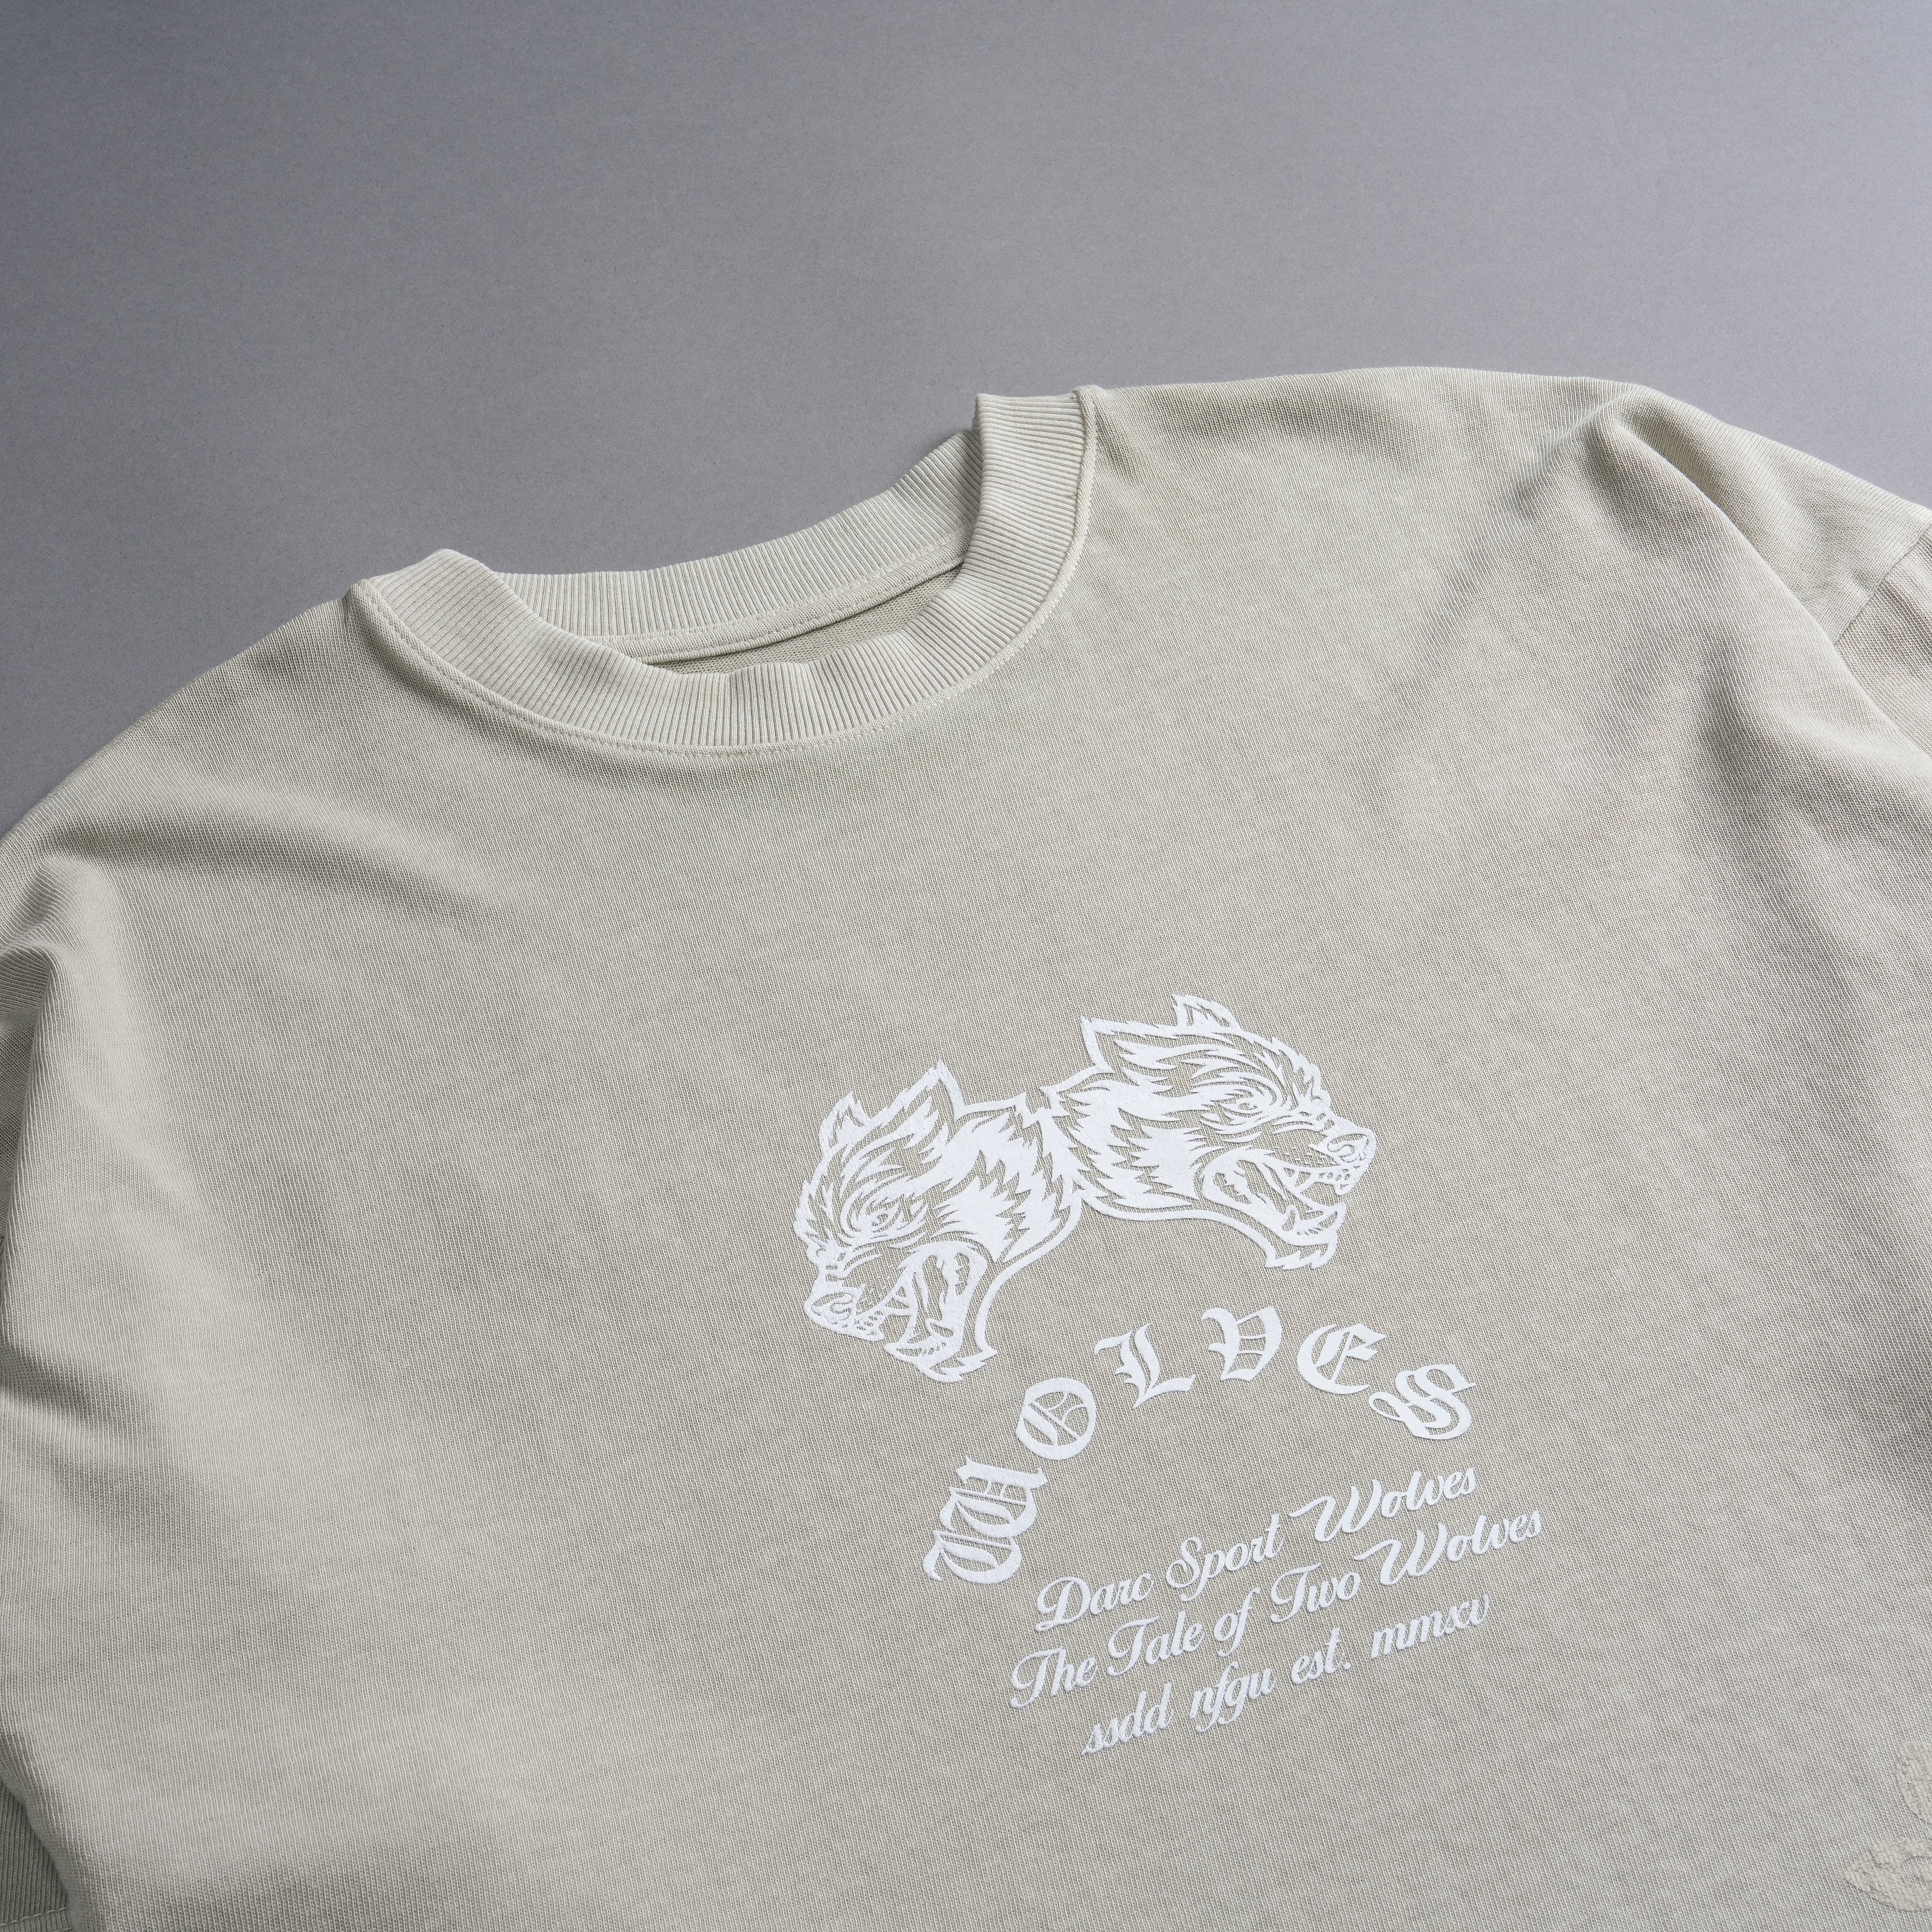 Two Wolves "Premium Vintage" Oversized Unisex Tee in Cactus Gray